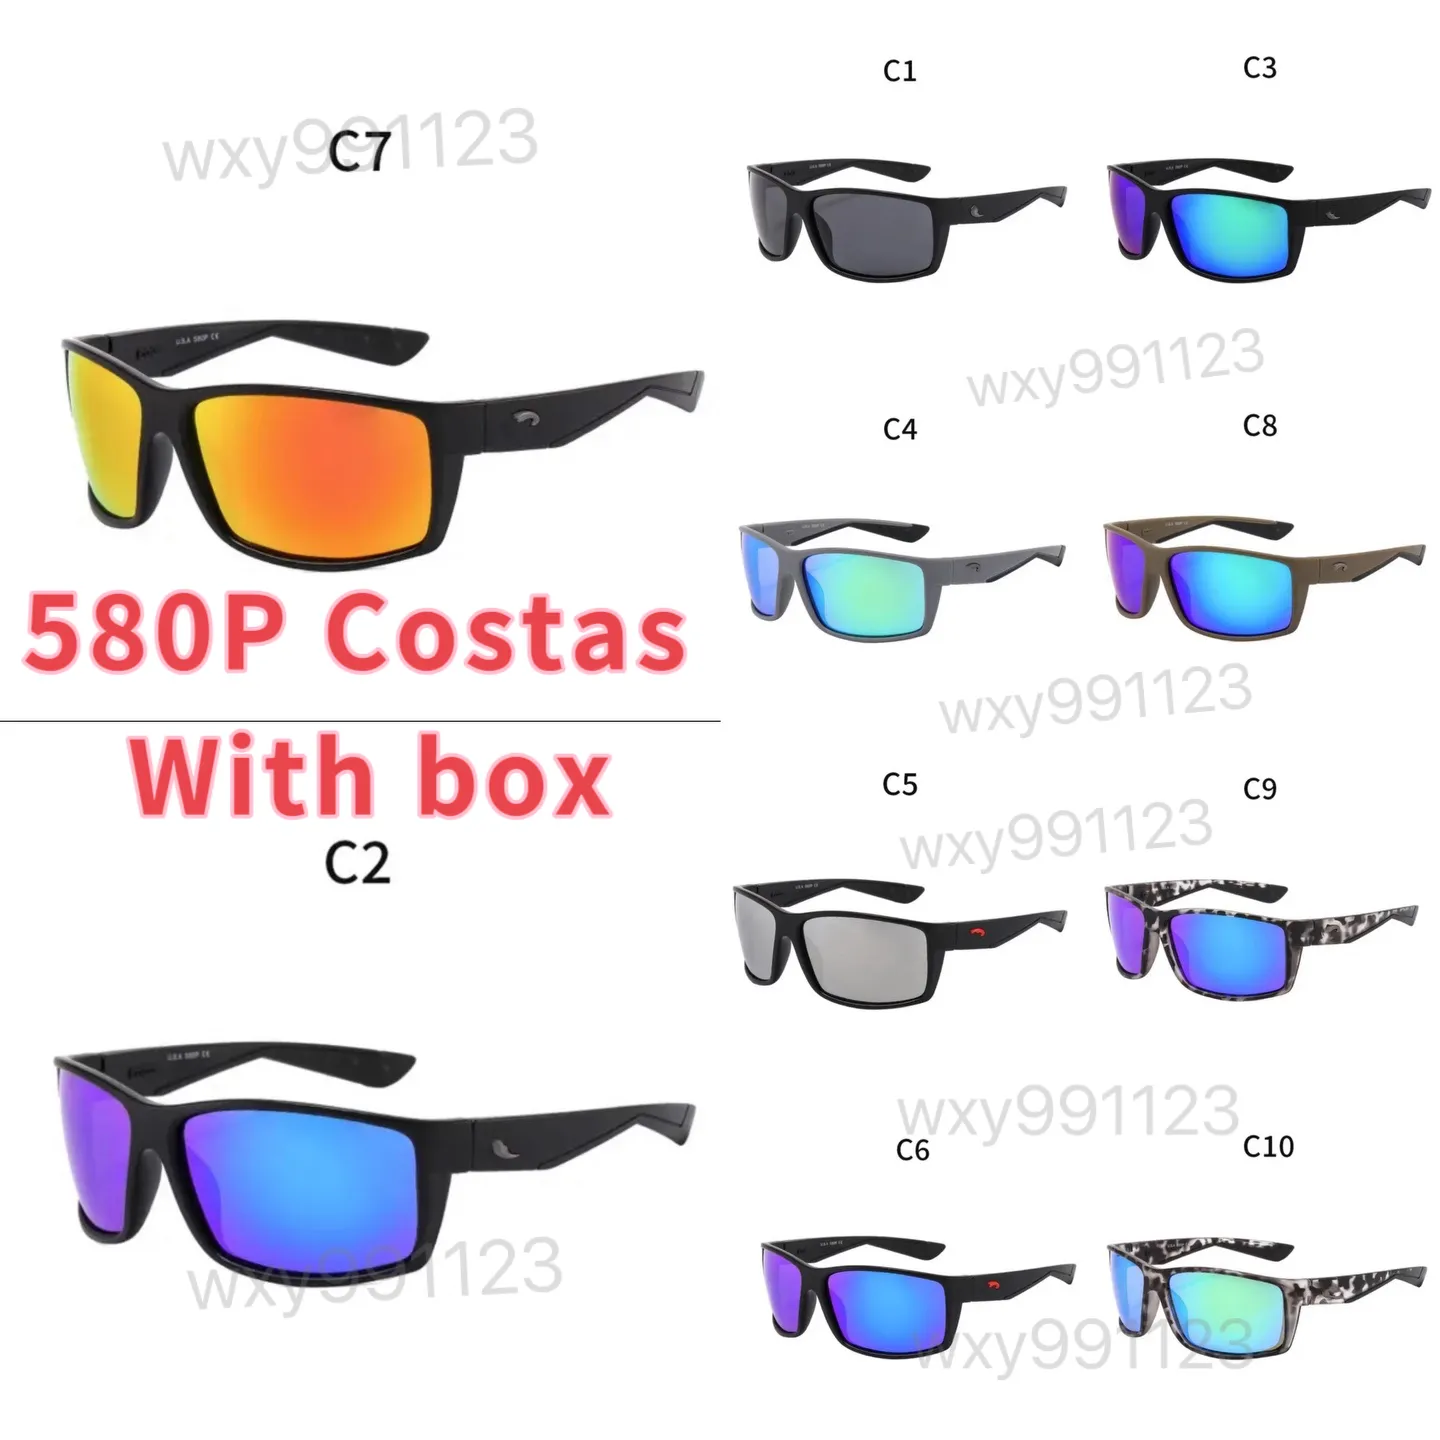 Luxury Polarized Sports Sunglasses For Men And Women Designer Sun Glasses  For Driving And Travel Black And Blue Shades L3 Costa Sunglass From  Wxy991123, $4.92